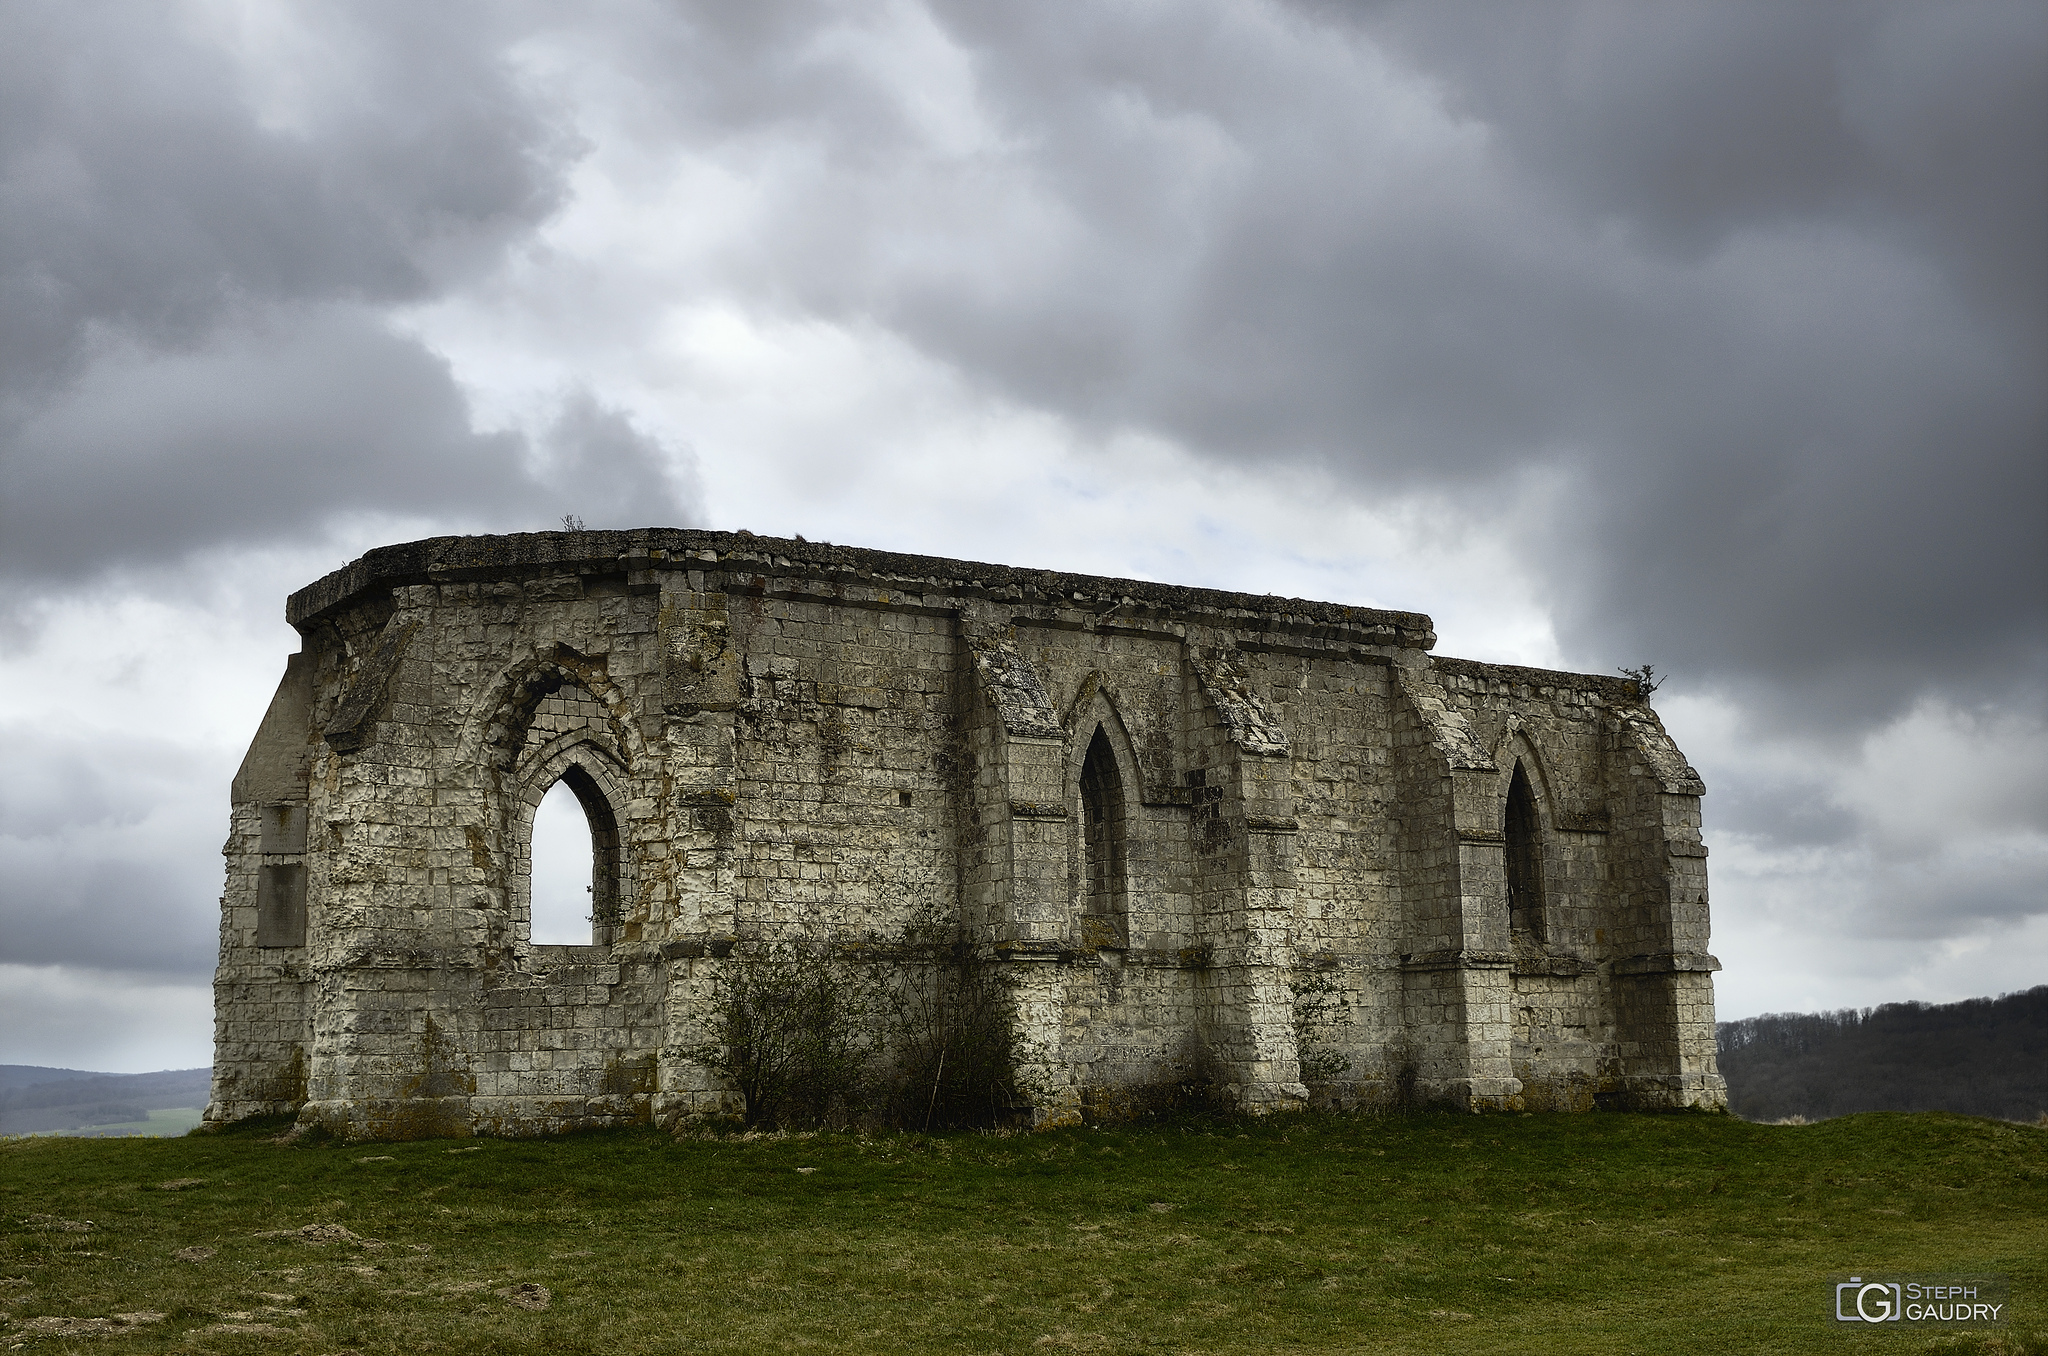 The ruins of the 13th century chapel of Saint Louis at Guémy [Click to start slideshow]